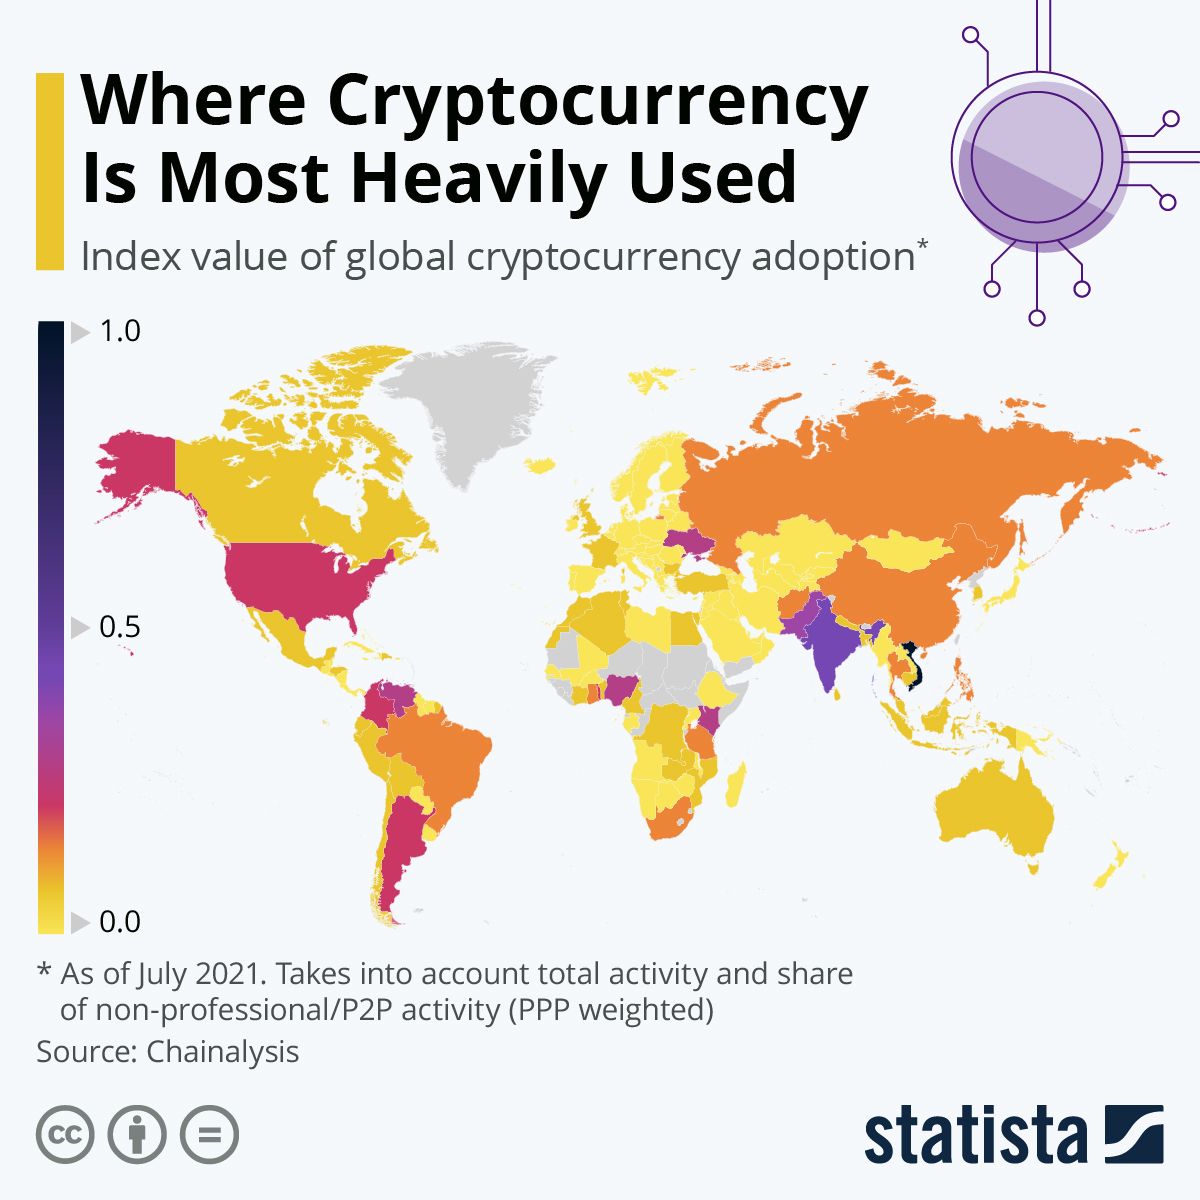 Where Bitcoin is most heavily used